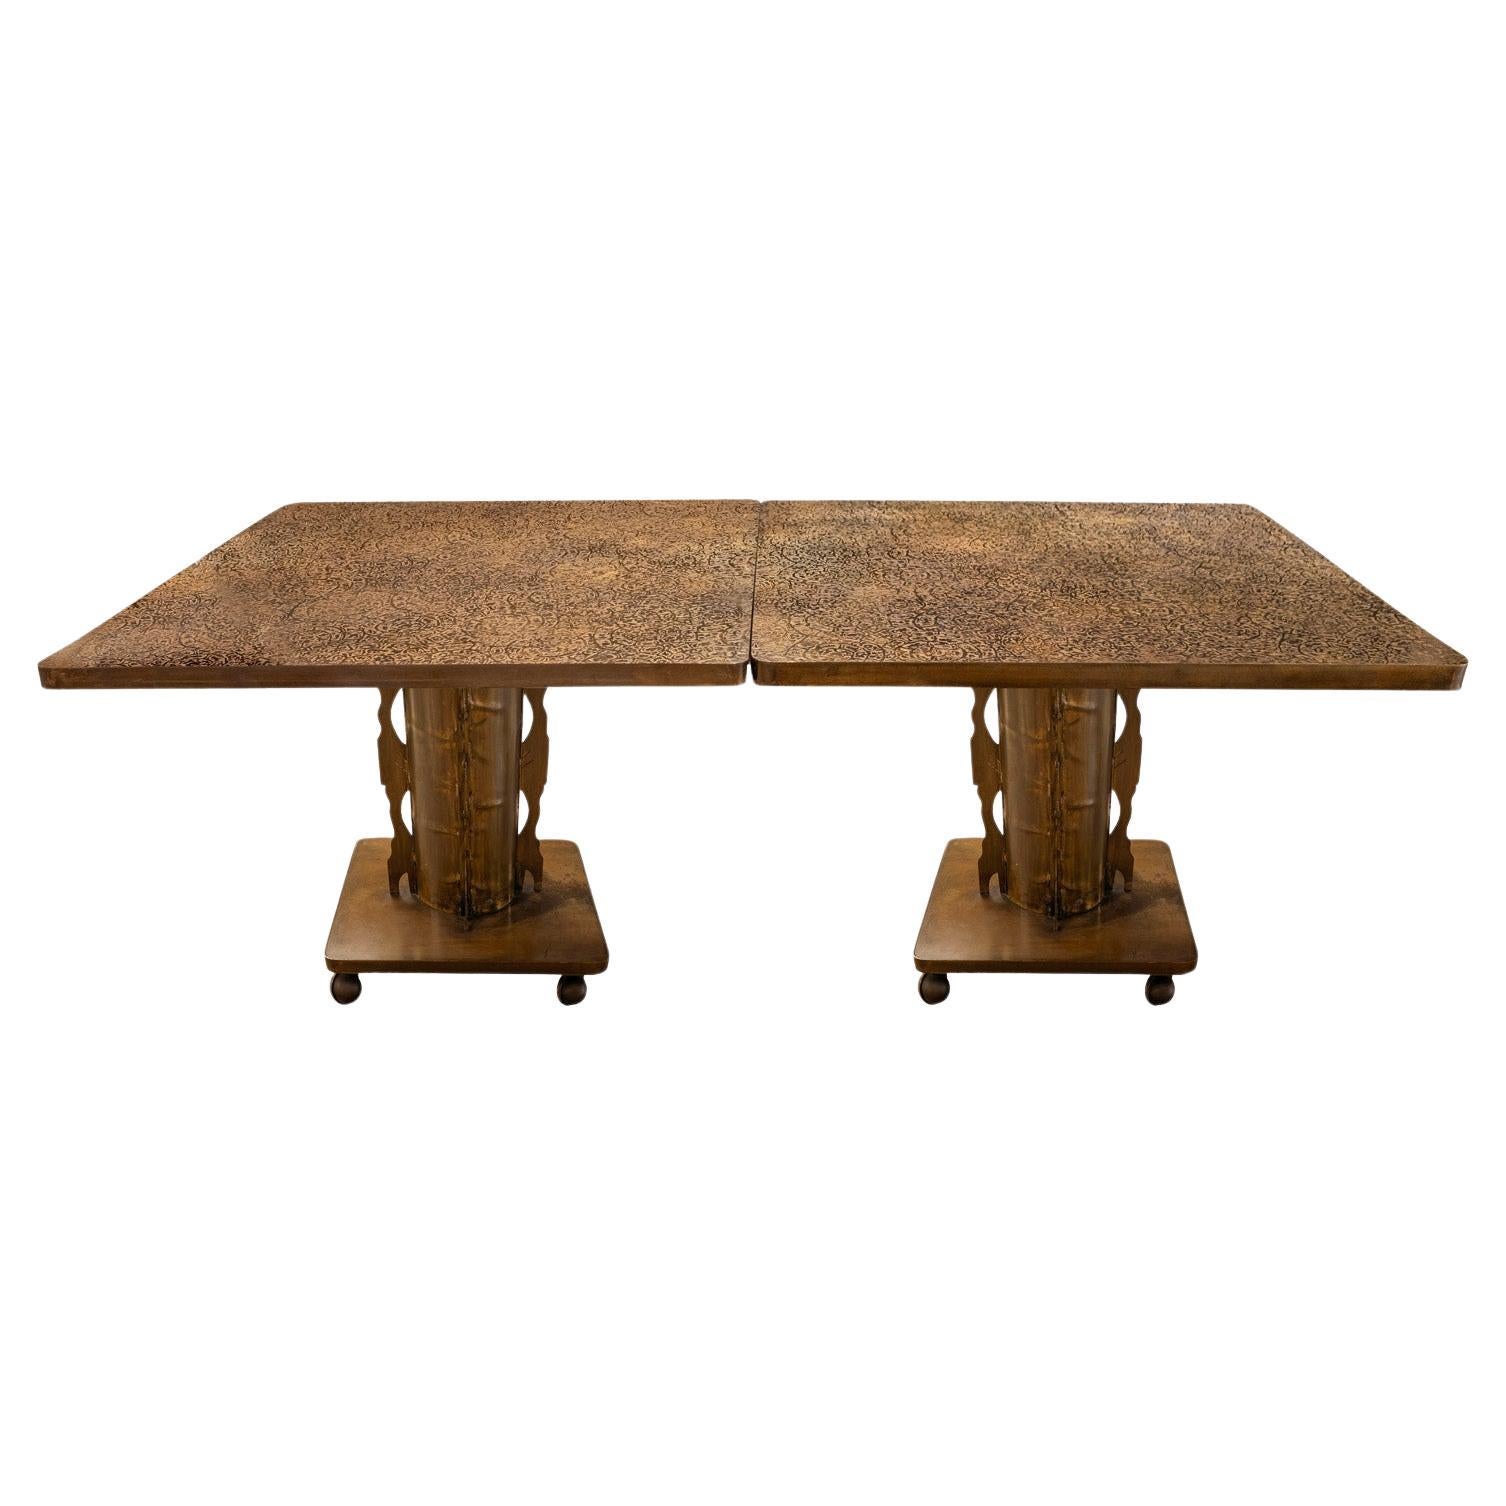 Philip and Kelvin LaVerne 2 piece "Etruscan Spiral Dining Table" 1960s (Signed)